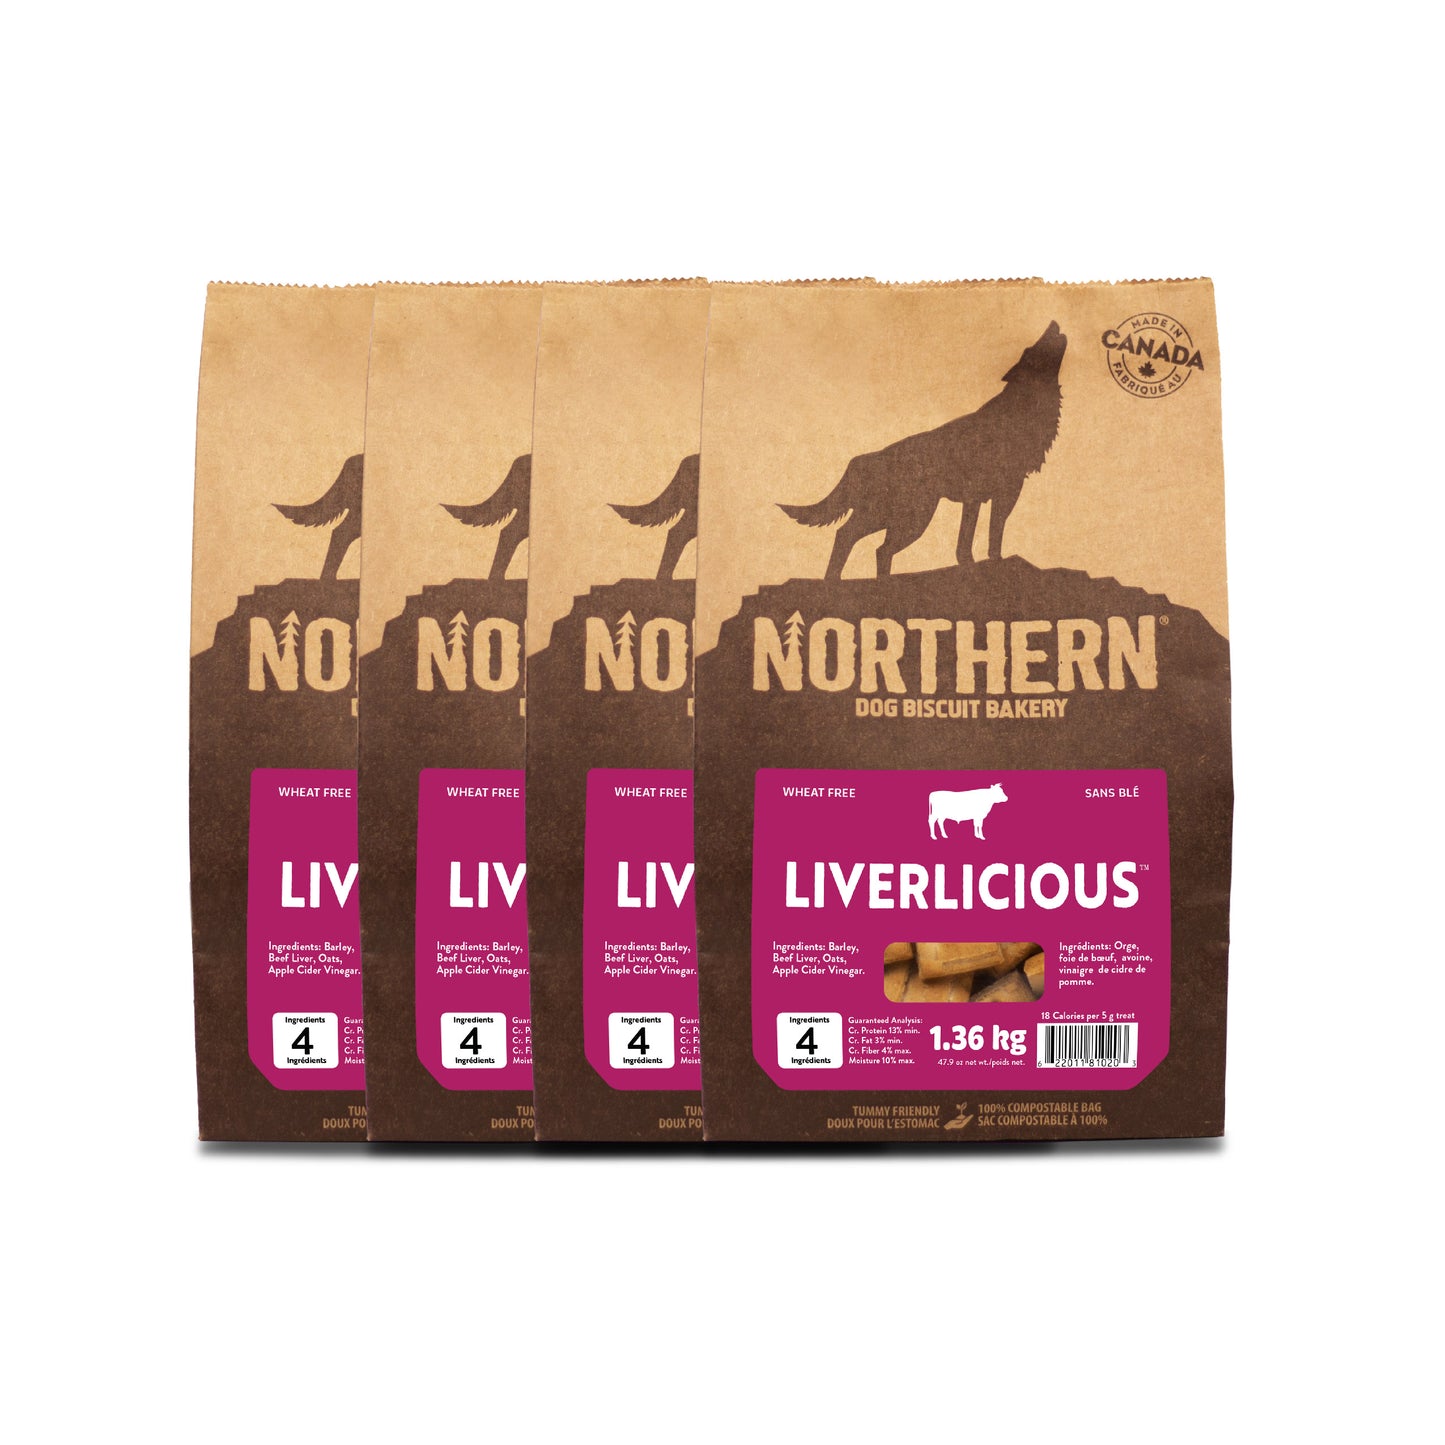 Liverlicious Biscuits - 4 bag bundle front view image